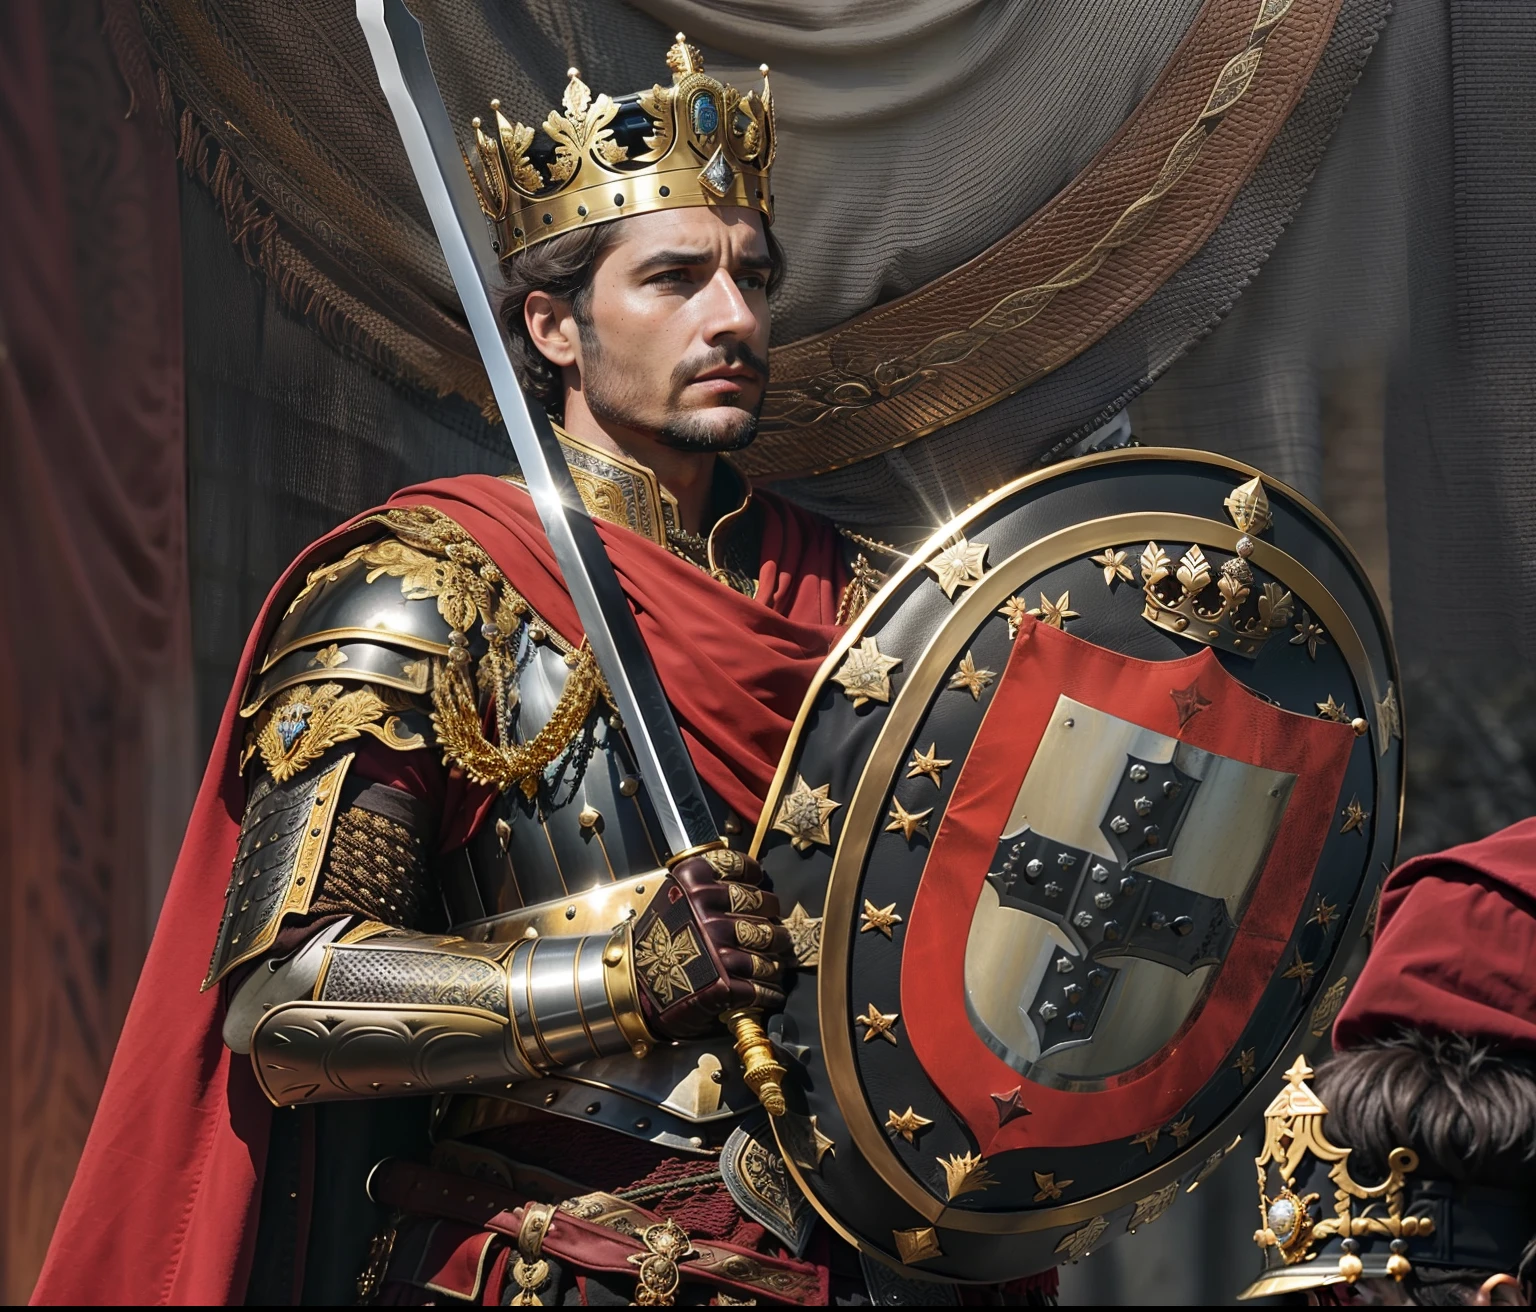 4K, HD, realistic,a man wearing a crown and armor, holding a shield in one hand and a sword in the other. He has an intense expression on his face, with furrowed brows and pursed lips. His eyes are focused intently ahead of him as if he is ready to take action at any moment. The man's clothing consists of brown leather armor that covers most of his body, including his chest, arms, legs and feet. On top of this he wears a golden crown atop his head which adds to the regal air about him. The colors used are mostly shades of grey with some accents of brown from the leather armor and gold from the crown. The image must convey strength and power through its subject matter, use of color to create depth within the image. 44 years old, cinematic, portuguese monarchy